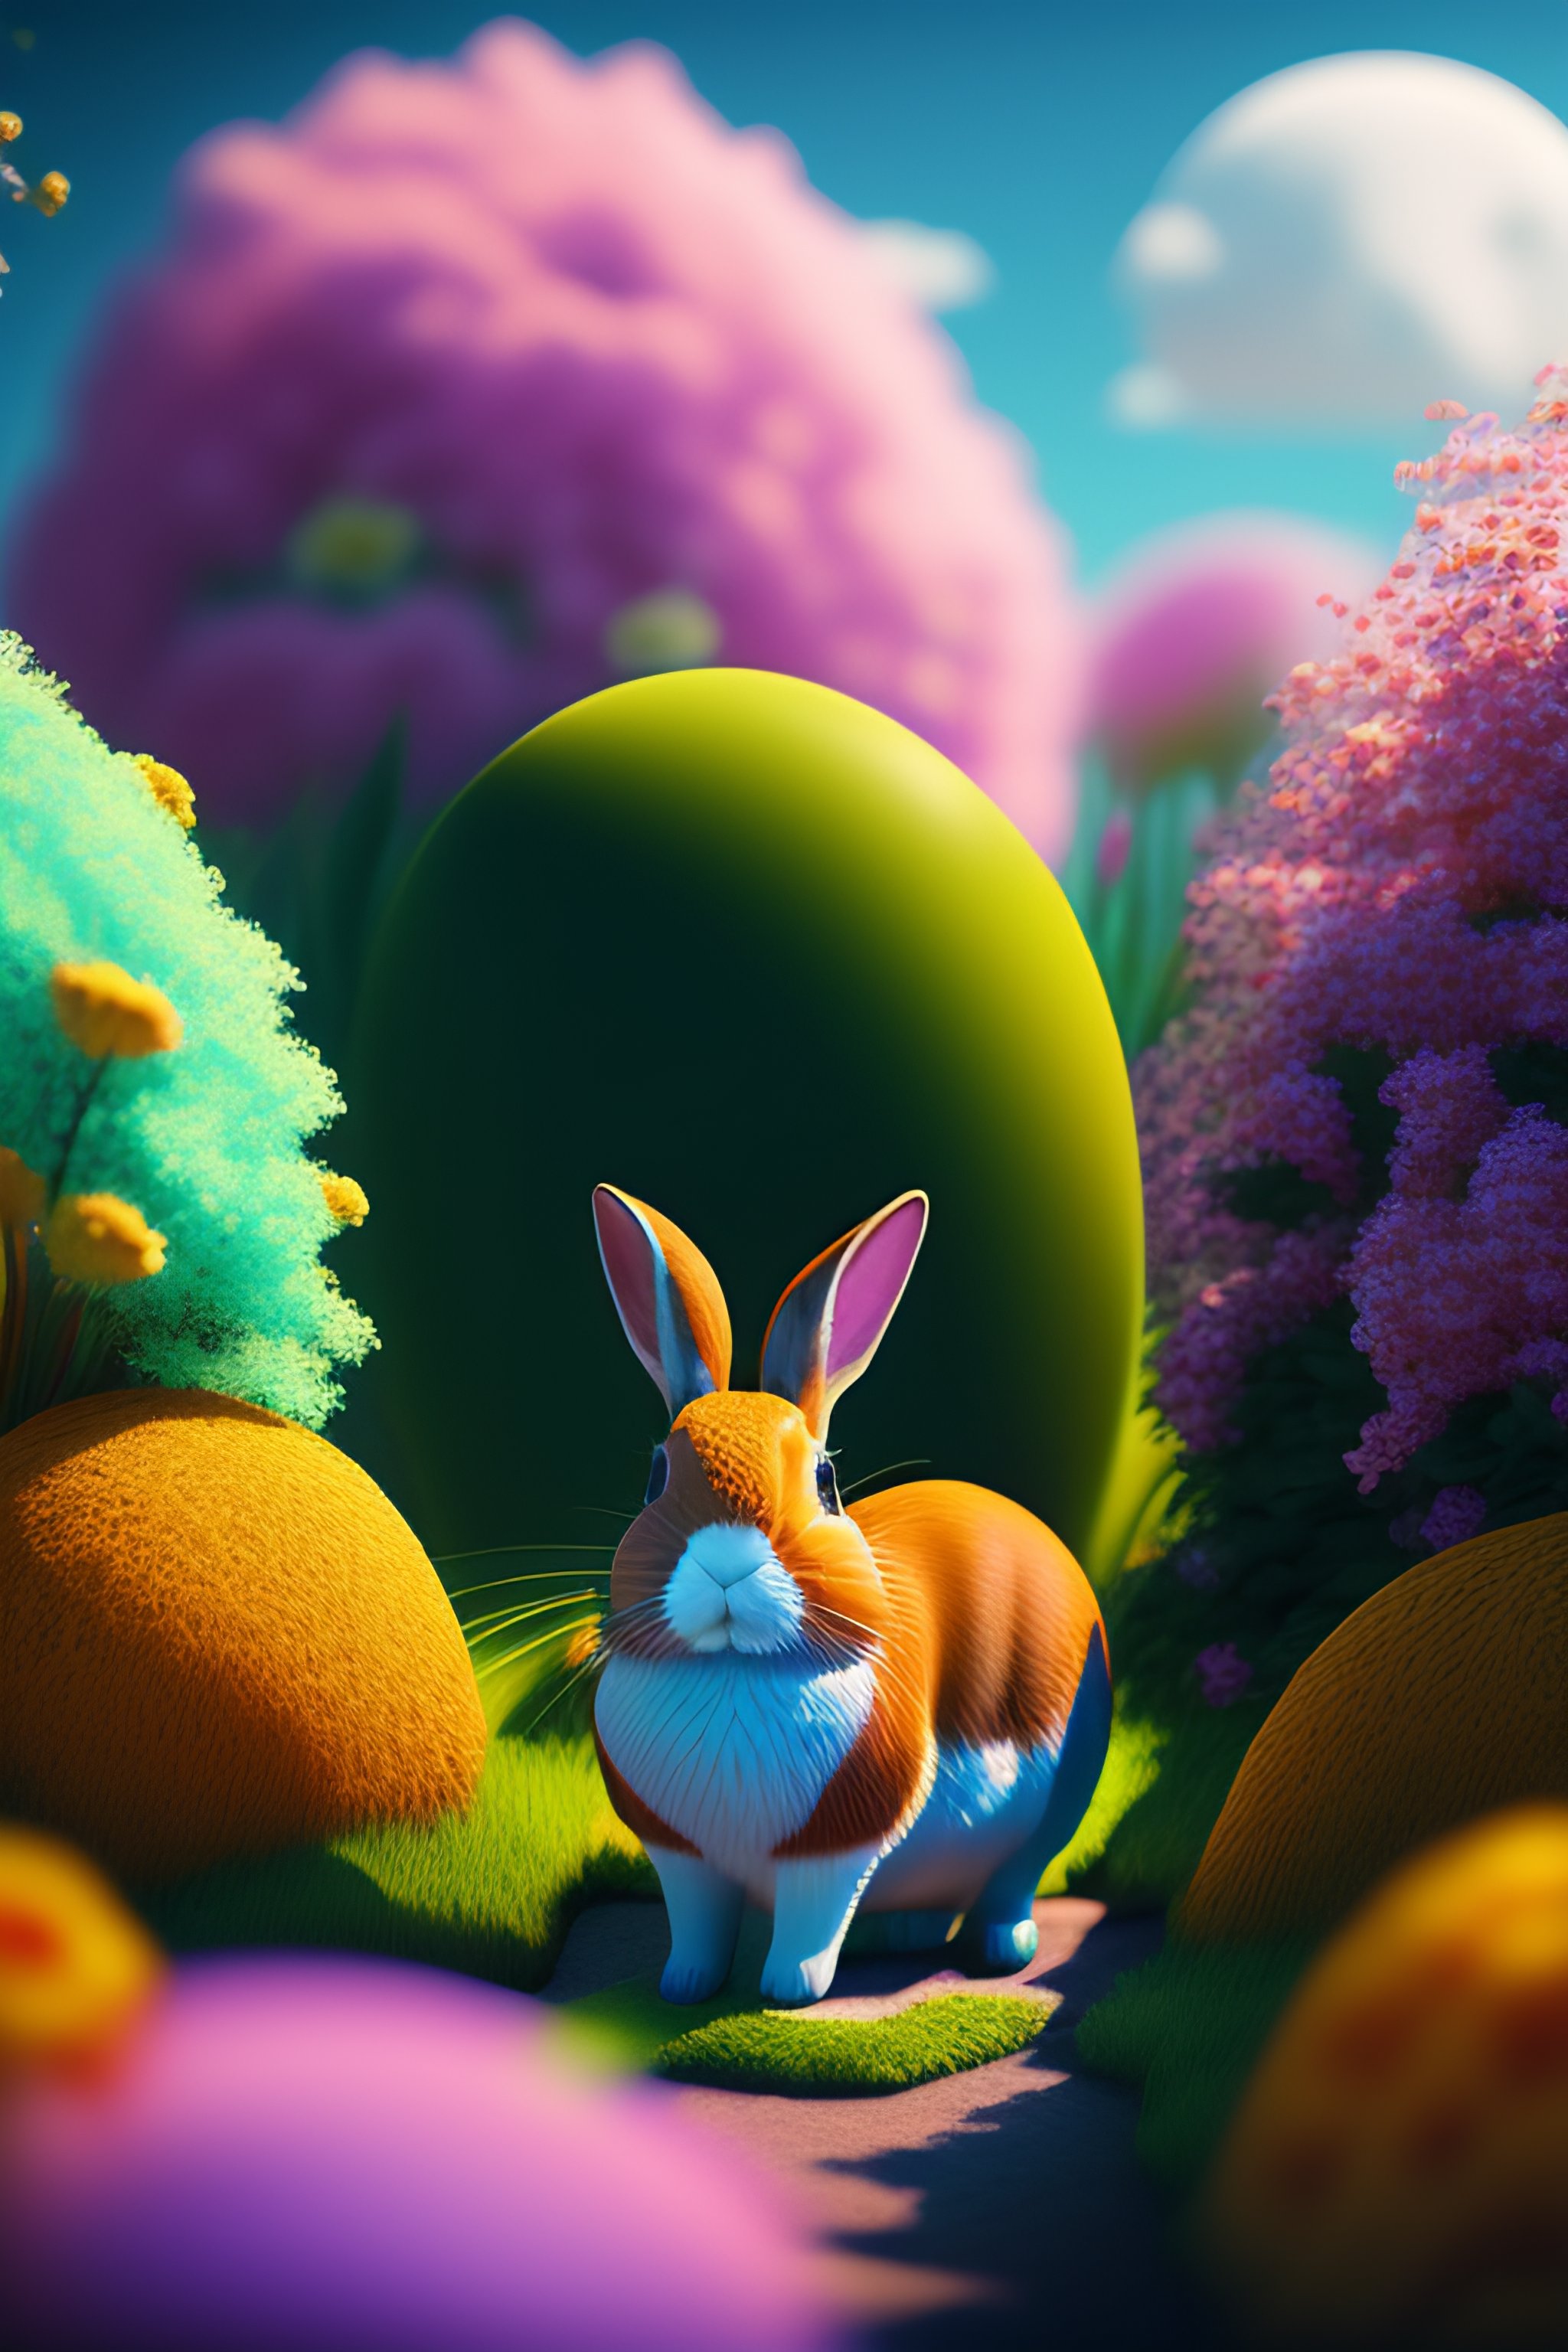 Lexica - Rabbit and Fluffy animals in flower garden with color bubbles ...